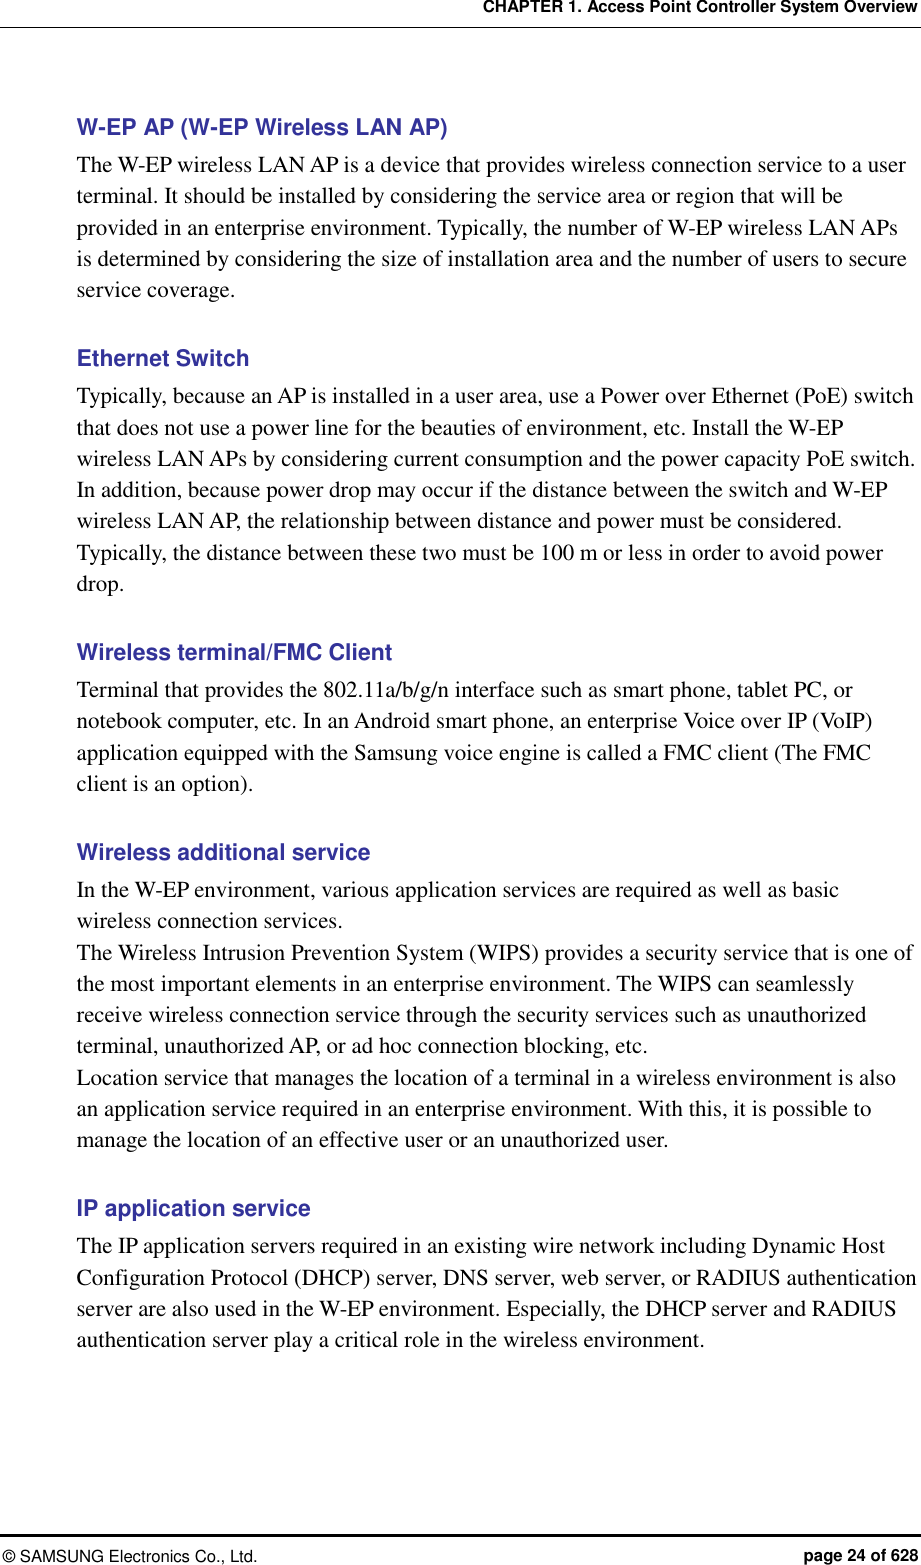 CHAPTER 1. Access Point Controller System Overview ©  SAMSUNG Electronics Co., Ltd.  page 24 of 628 W-EP AP (W-EP Wireless LAN AP) The W-EP wireless LAN AP is a device that provides wireless connection service to a user terminal. It should be installed by considering the service area or region that will be provided in an enterprise environment. Typically, the number of W-EP wireless LAN APs is determined by considering the size of installation area and the number of users to secure service coverage.  Ethernet Switch Typically, because an AP is installed in a user area, use a Power over Ethernet (PoE) switch that does not use a power line for the beauties of environment, etc. Install the W-EP wireless LAN APs by considering current consumption and the power capacity PoE switch. In addition, because power drop may occur if the distance between the switch and W-EP wireless LAN AP, the relationship between distance and power must be considered. Typically, the distance between these two must be 100 m or less in order to avoid power drop.  Wireless terminal/FMC Client Terminal that provides the 802.11a/b/g/n interface such as smart phone, tablet PC, or notebook computer, etc. In an Android smart phone, an enterprise Voice over IP (VoIP) application equipped with the Samsung voice engine is called a FMC client (The FMC client is an option).  Wireless additional service In the W-EP environment, various application services are required as well as basic wireless connection services.   The Wireless Intrusion Prevention System (WIPS) provides a security service that is one of the most important elements in an enterprise environment. The WIPS can seamlessly receive wireless connection service through the security services such as unauthorized terminal, unauthorized AP, or ad hoc connection blocking, etc. Location service that manages the location of a terminal in a wireless environment is also an application service required in an enterprise environment. With this, it is possible to manage the location of an effective user or an unauthorized user.  IP application service The IP application servers required in an existing wire network including Dynamic Host Configuration Protocol (DHCP) server, DNS server, web server, or RADIUS authentication server are also used in the W-EP environment. Especially, the DHCP server and RADIUS authentication server play a critical role in the wireless environment.  